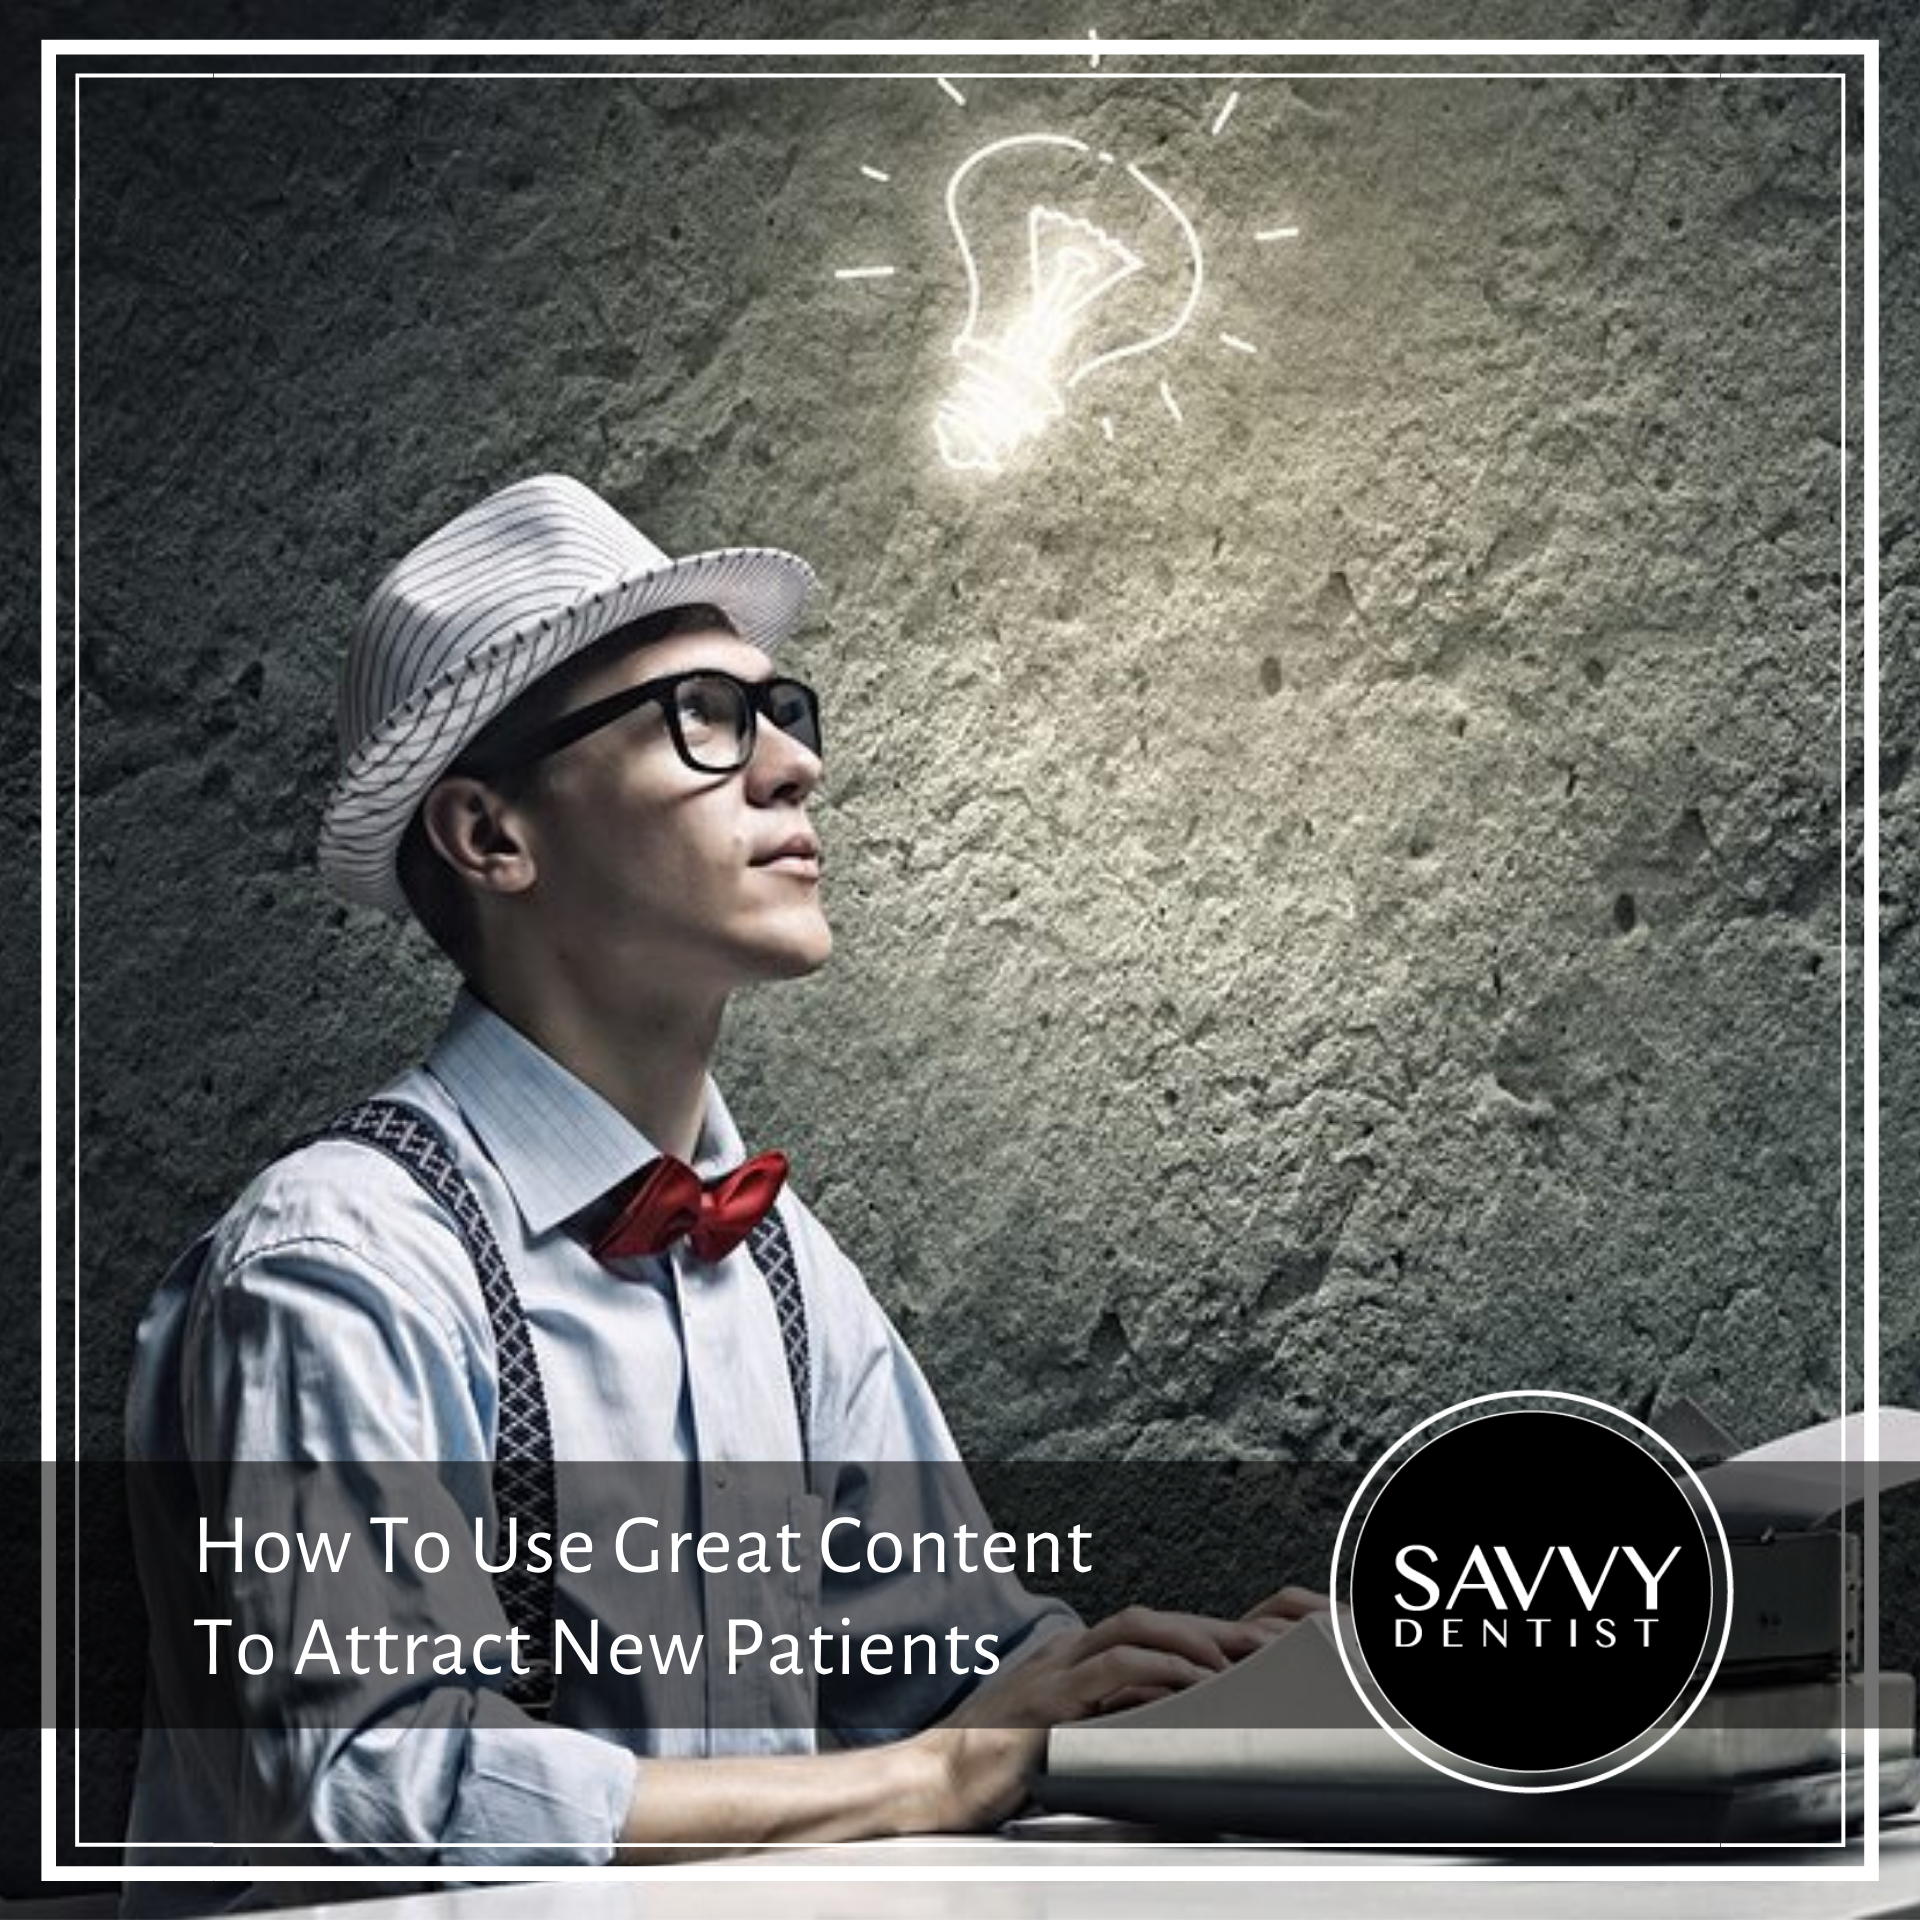 How To Use Great Content To Attract New Patients